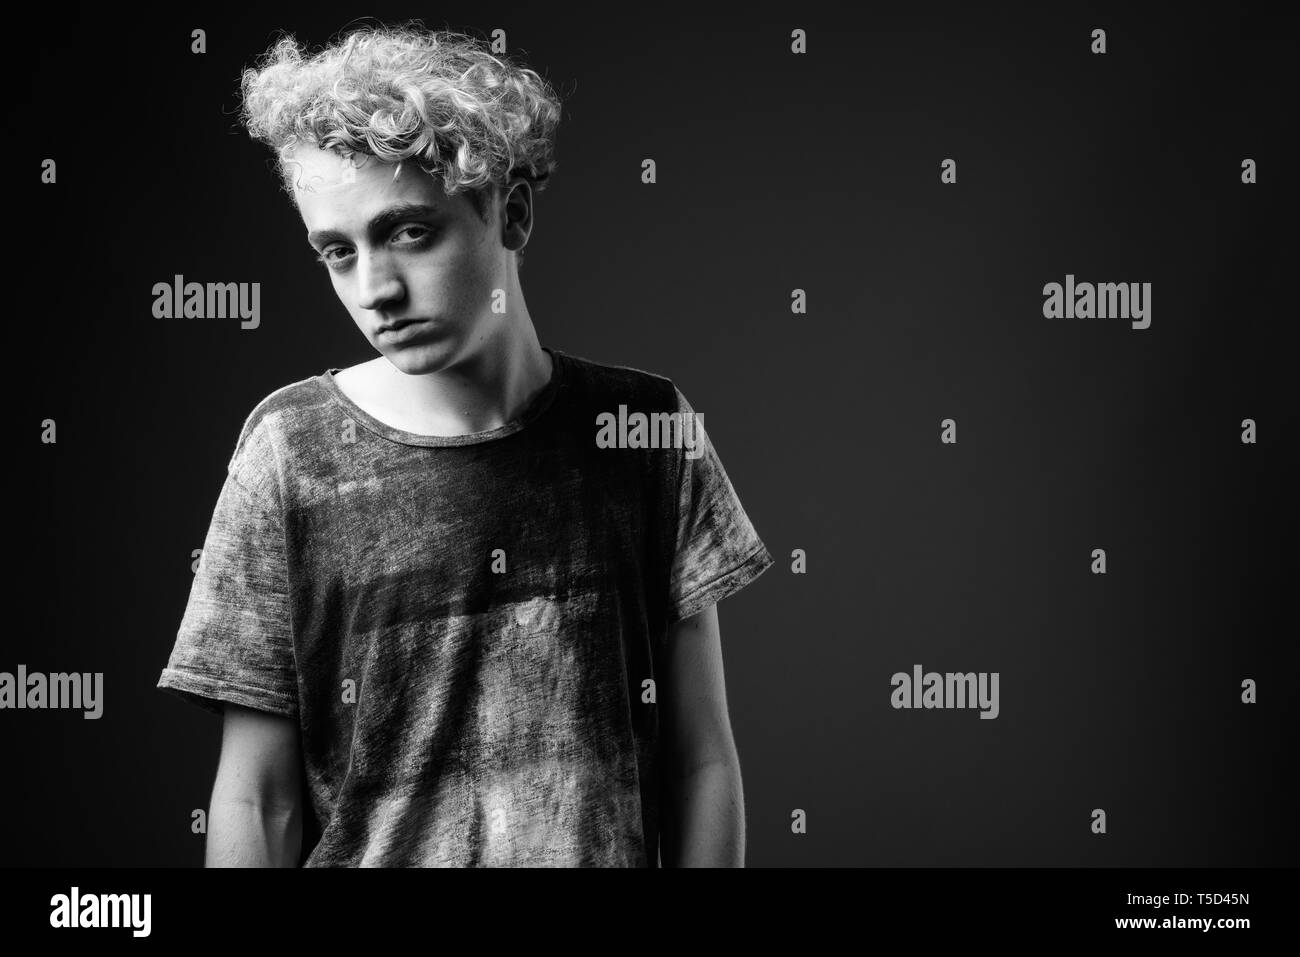 Skinny young man with curly hair against gray background in blac Stock Photo